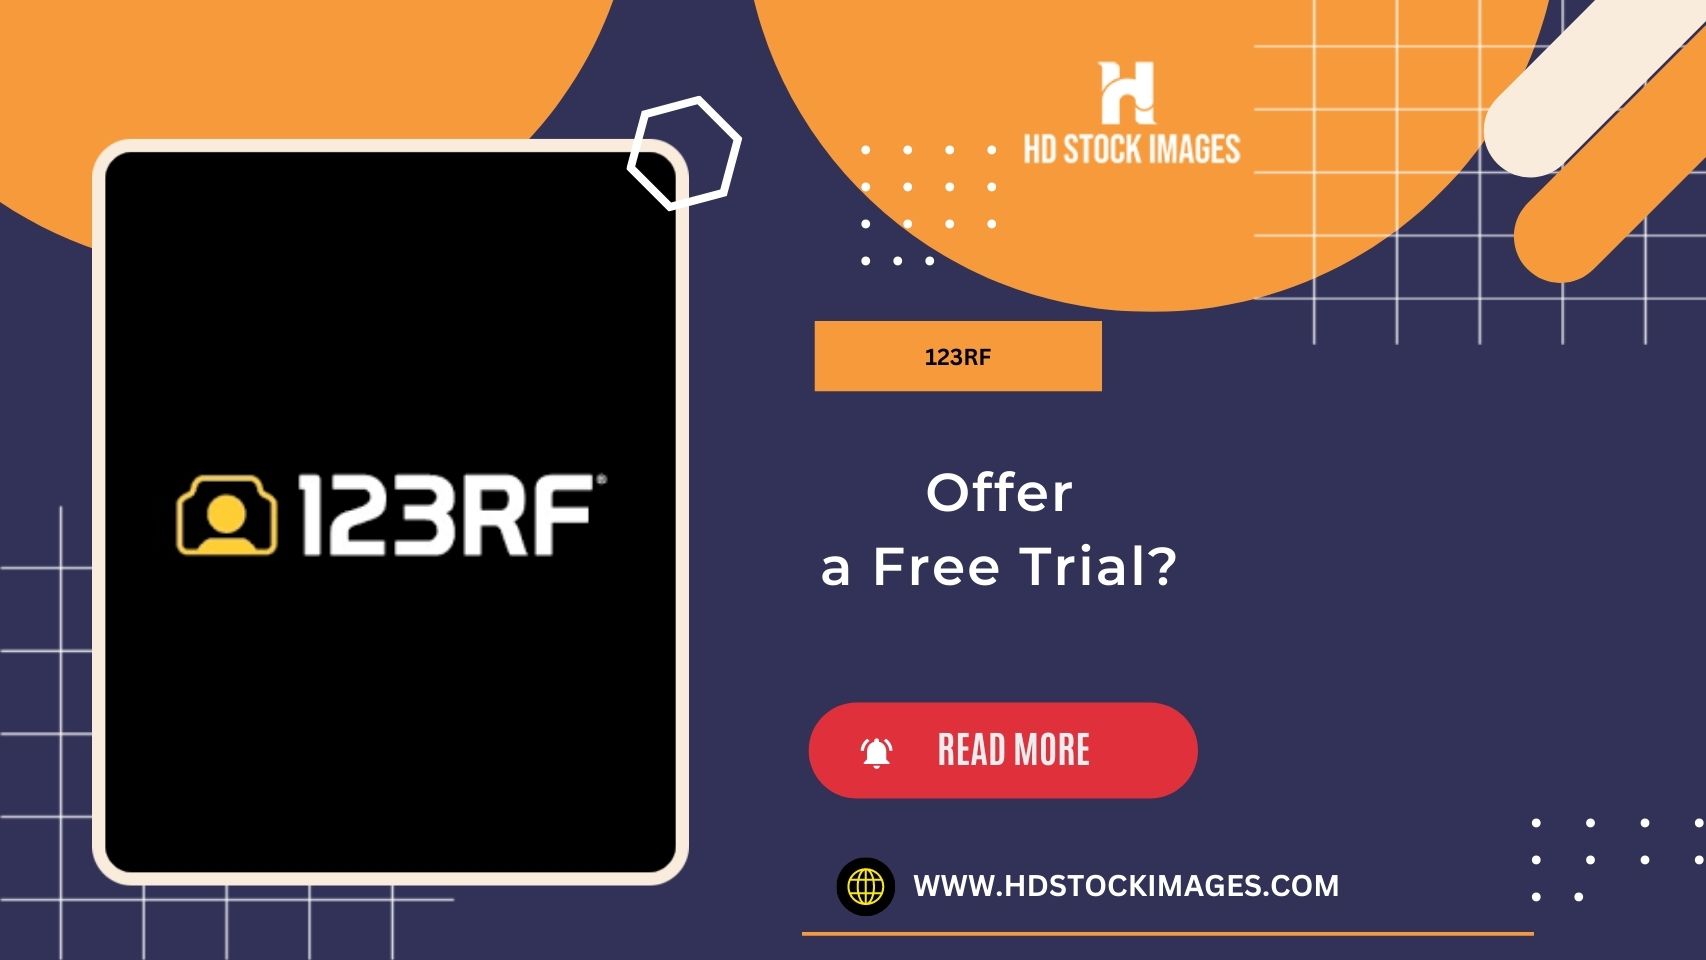 Does 123RF Offer a Free Trial? Exploring Options to Access the Platform